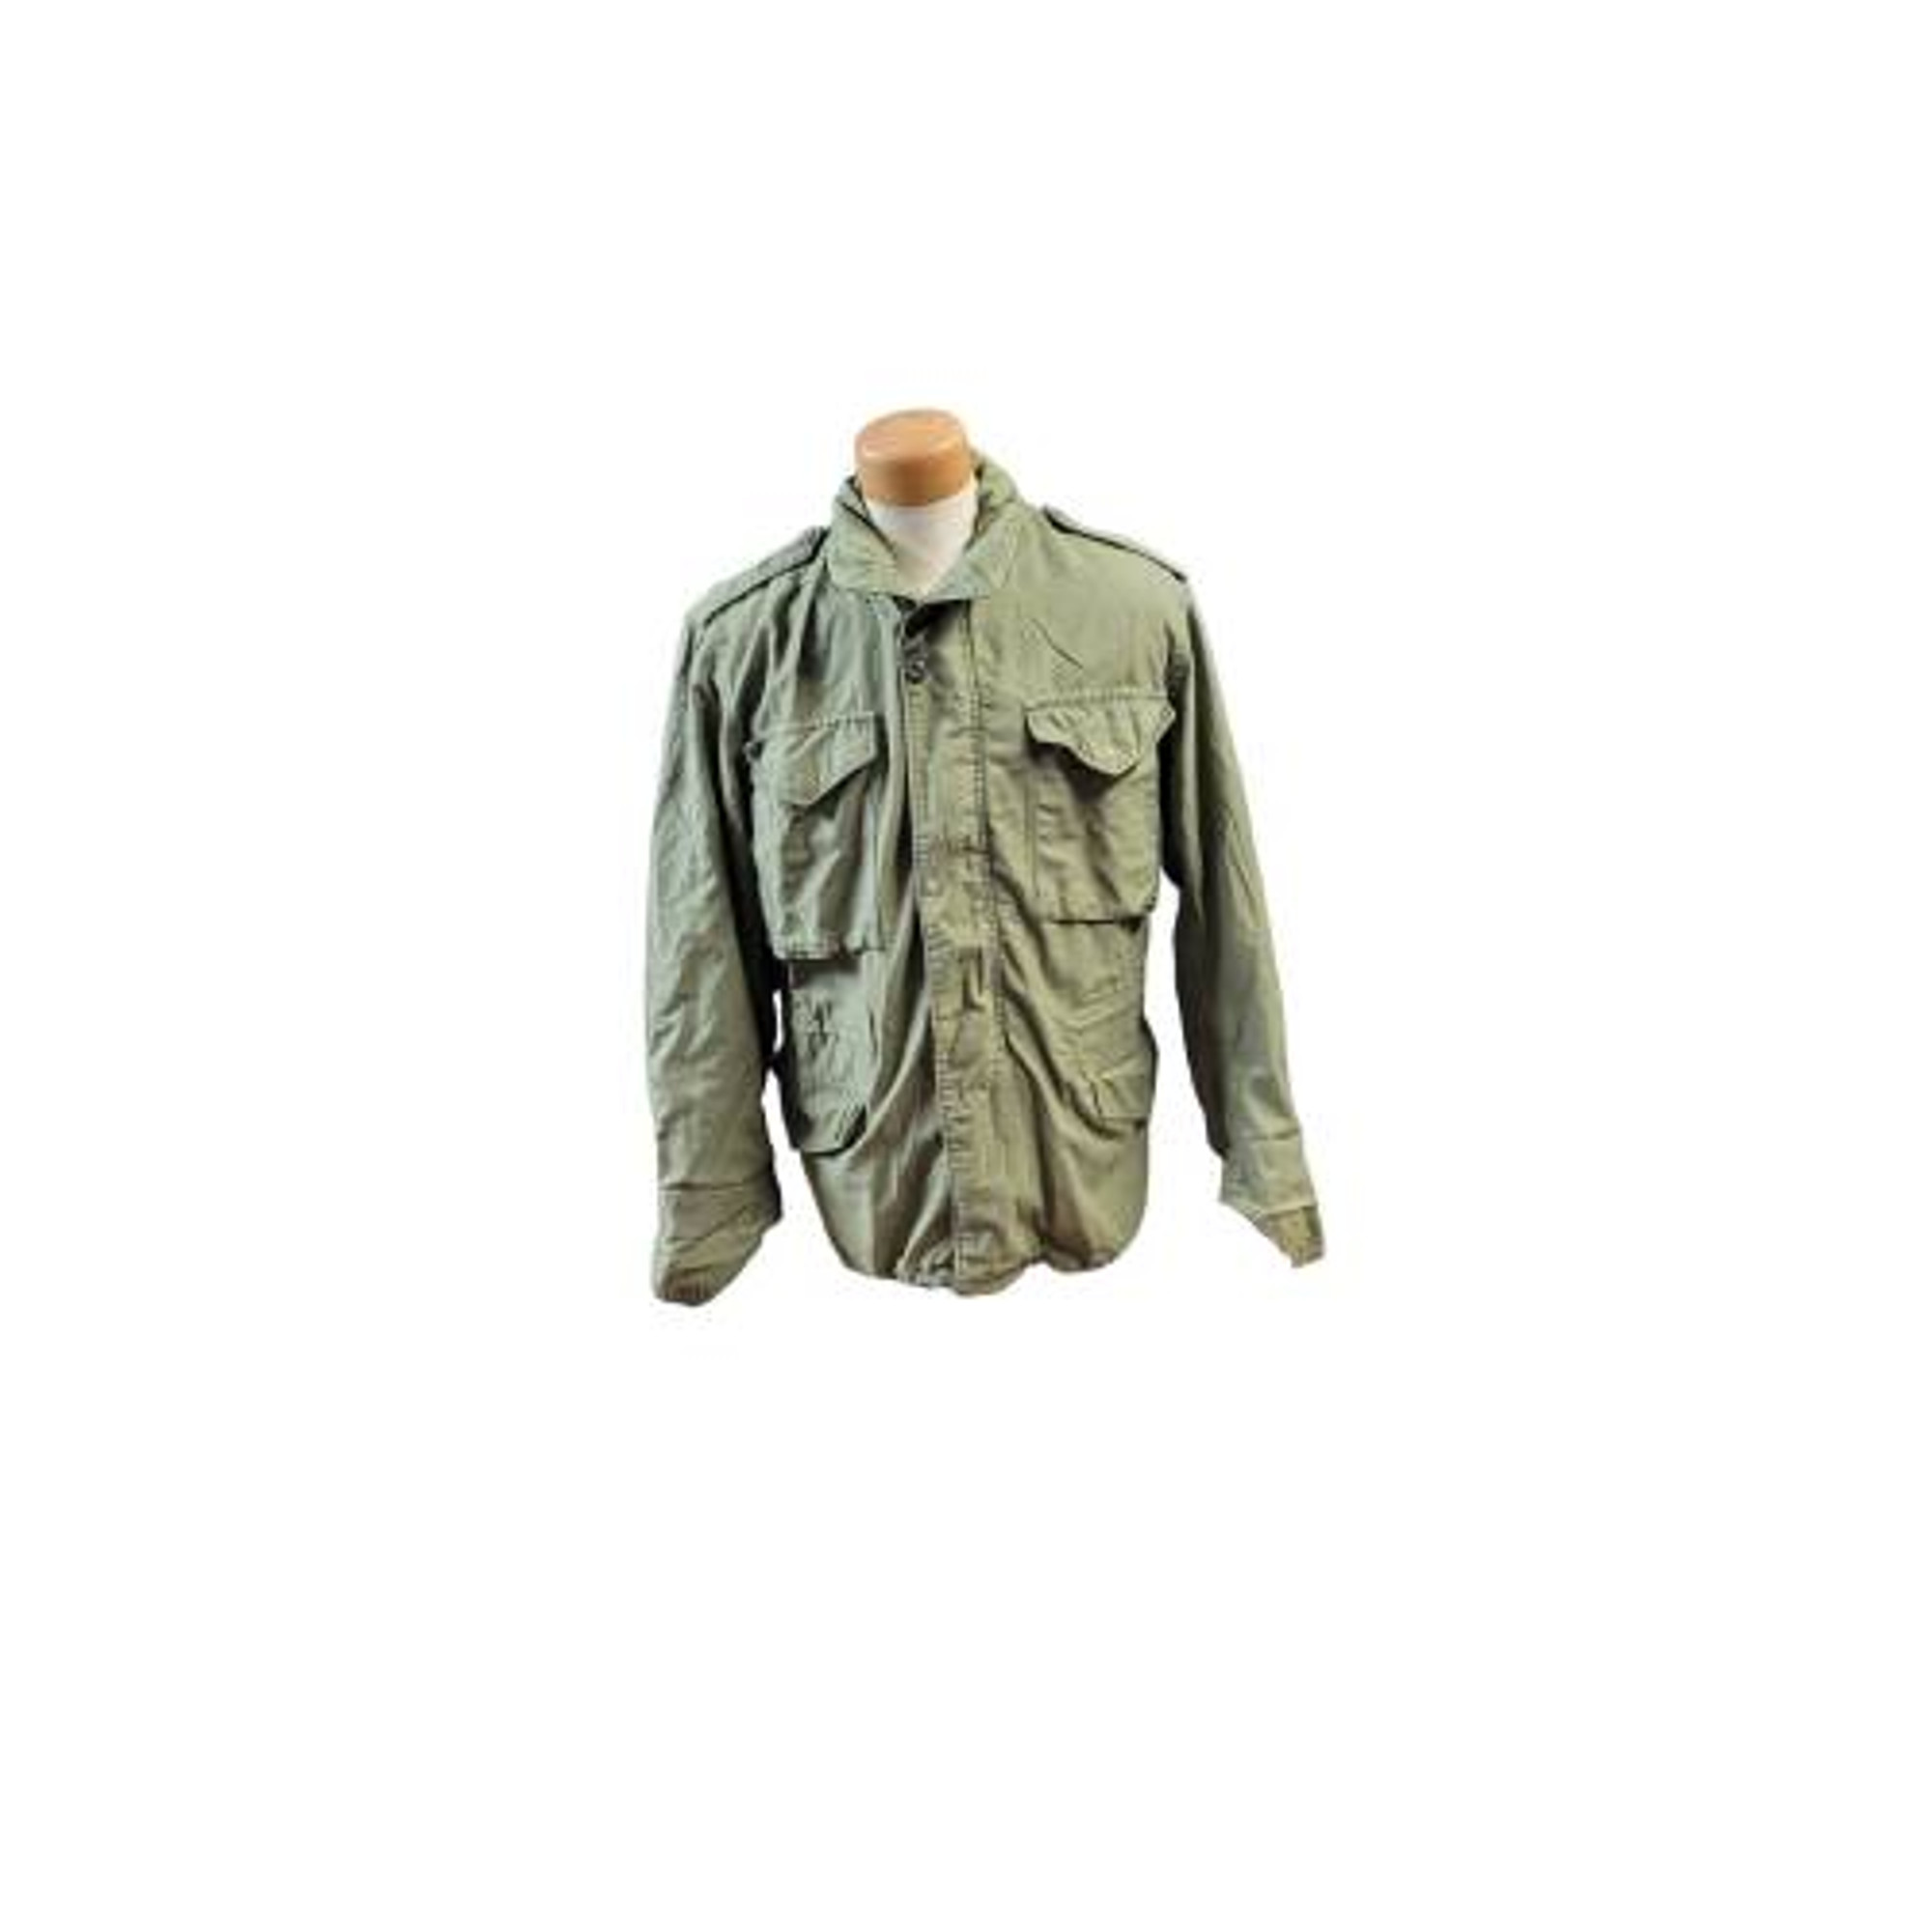 U.S. Armed Forces Authentic M65 Field Jacket